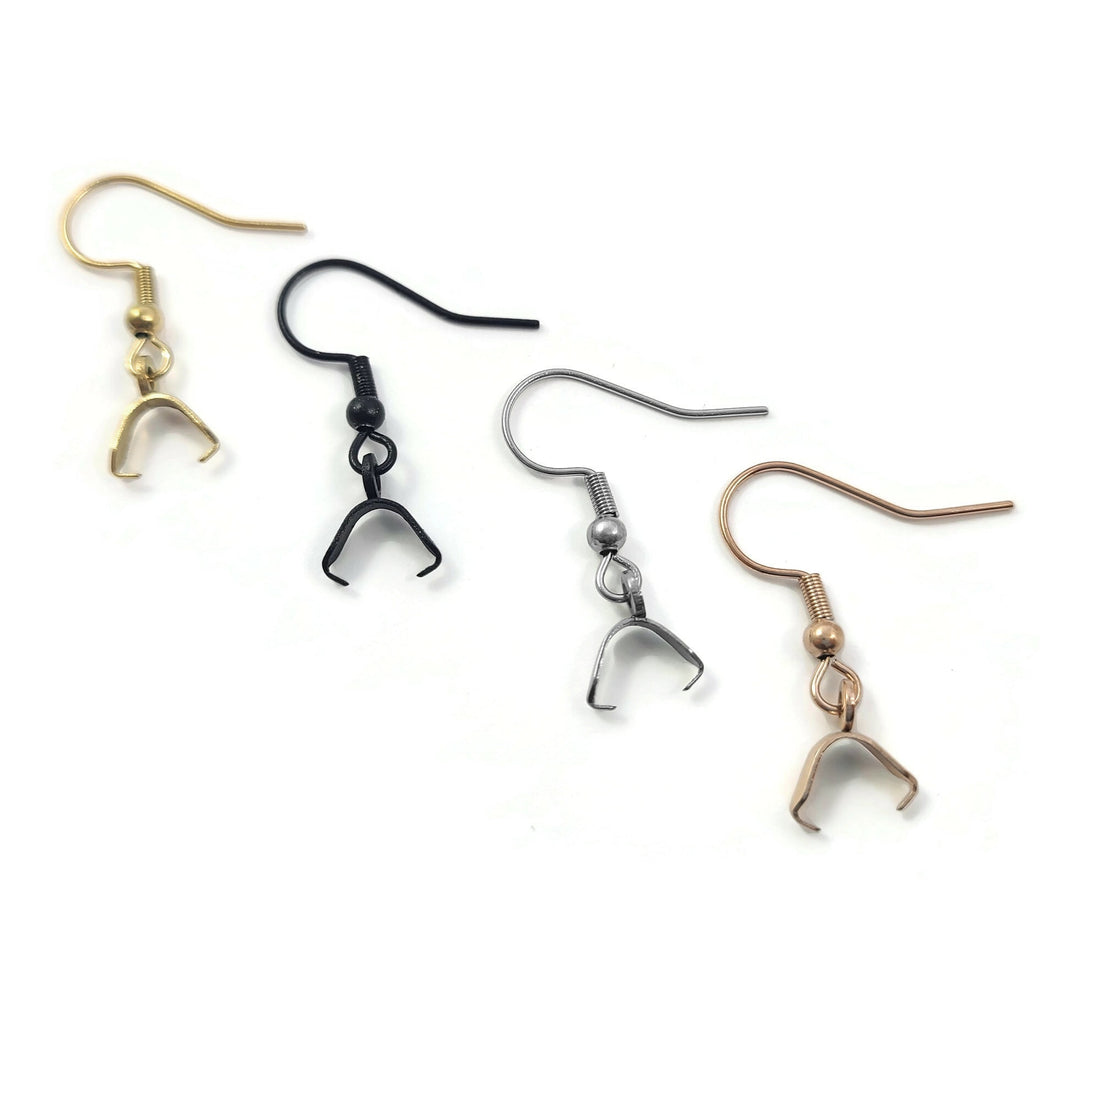 10pcs stainless steel earring hooks with pinch bails - Rose gold, gold, silver, black - Jewelry making findings